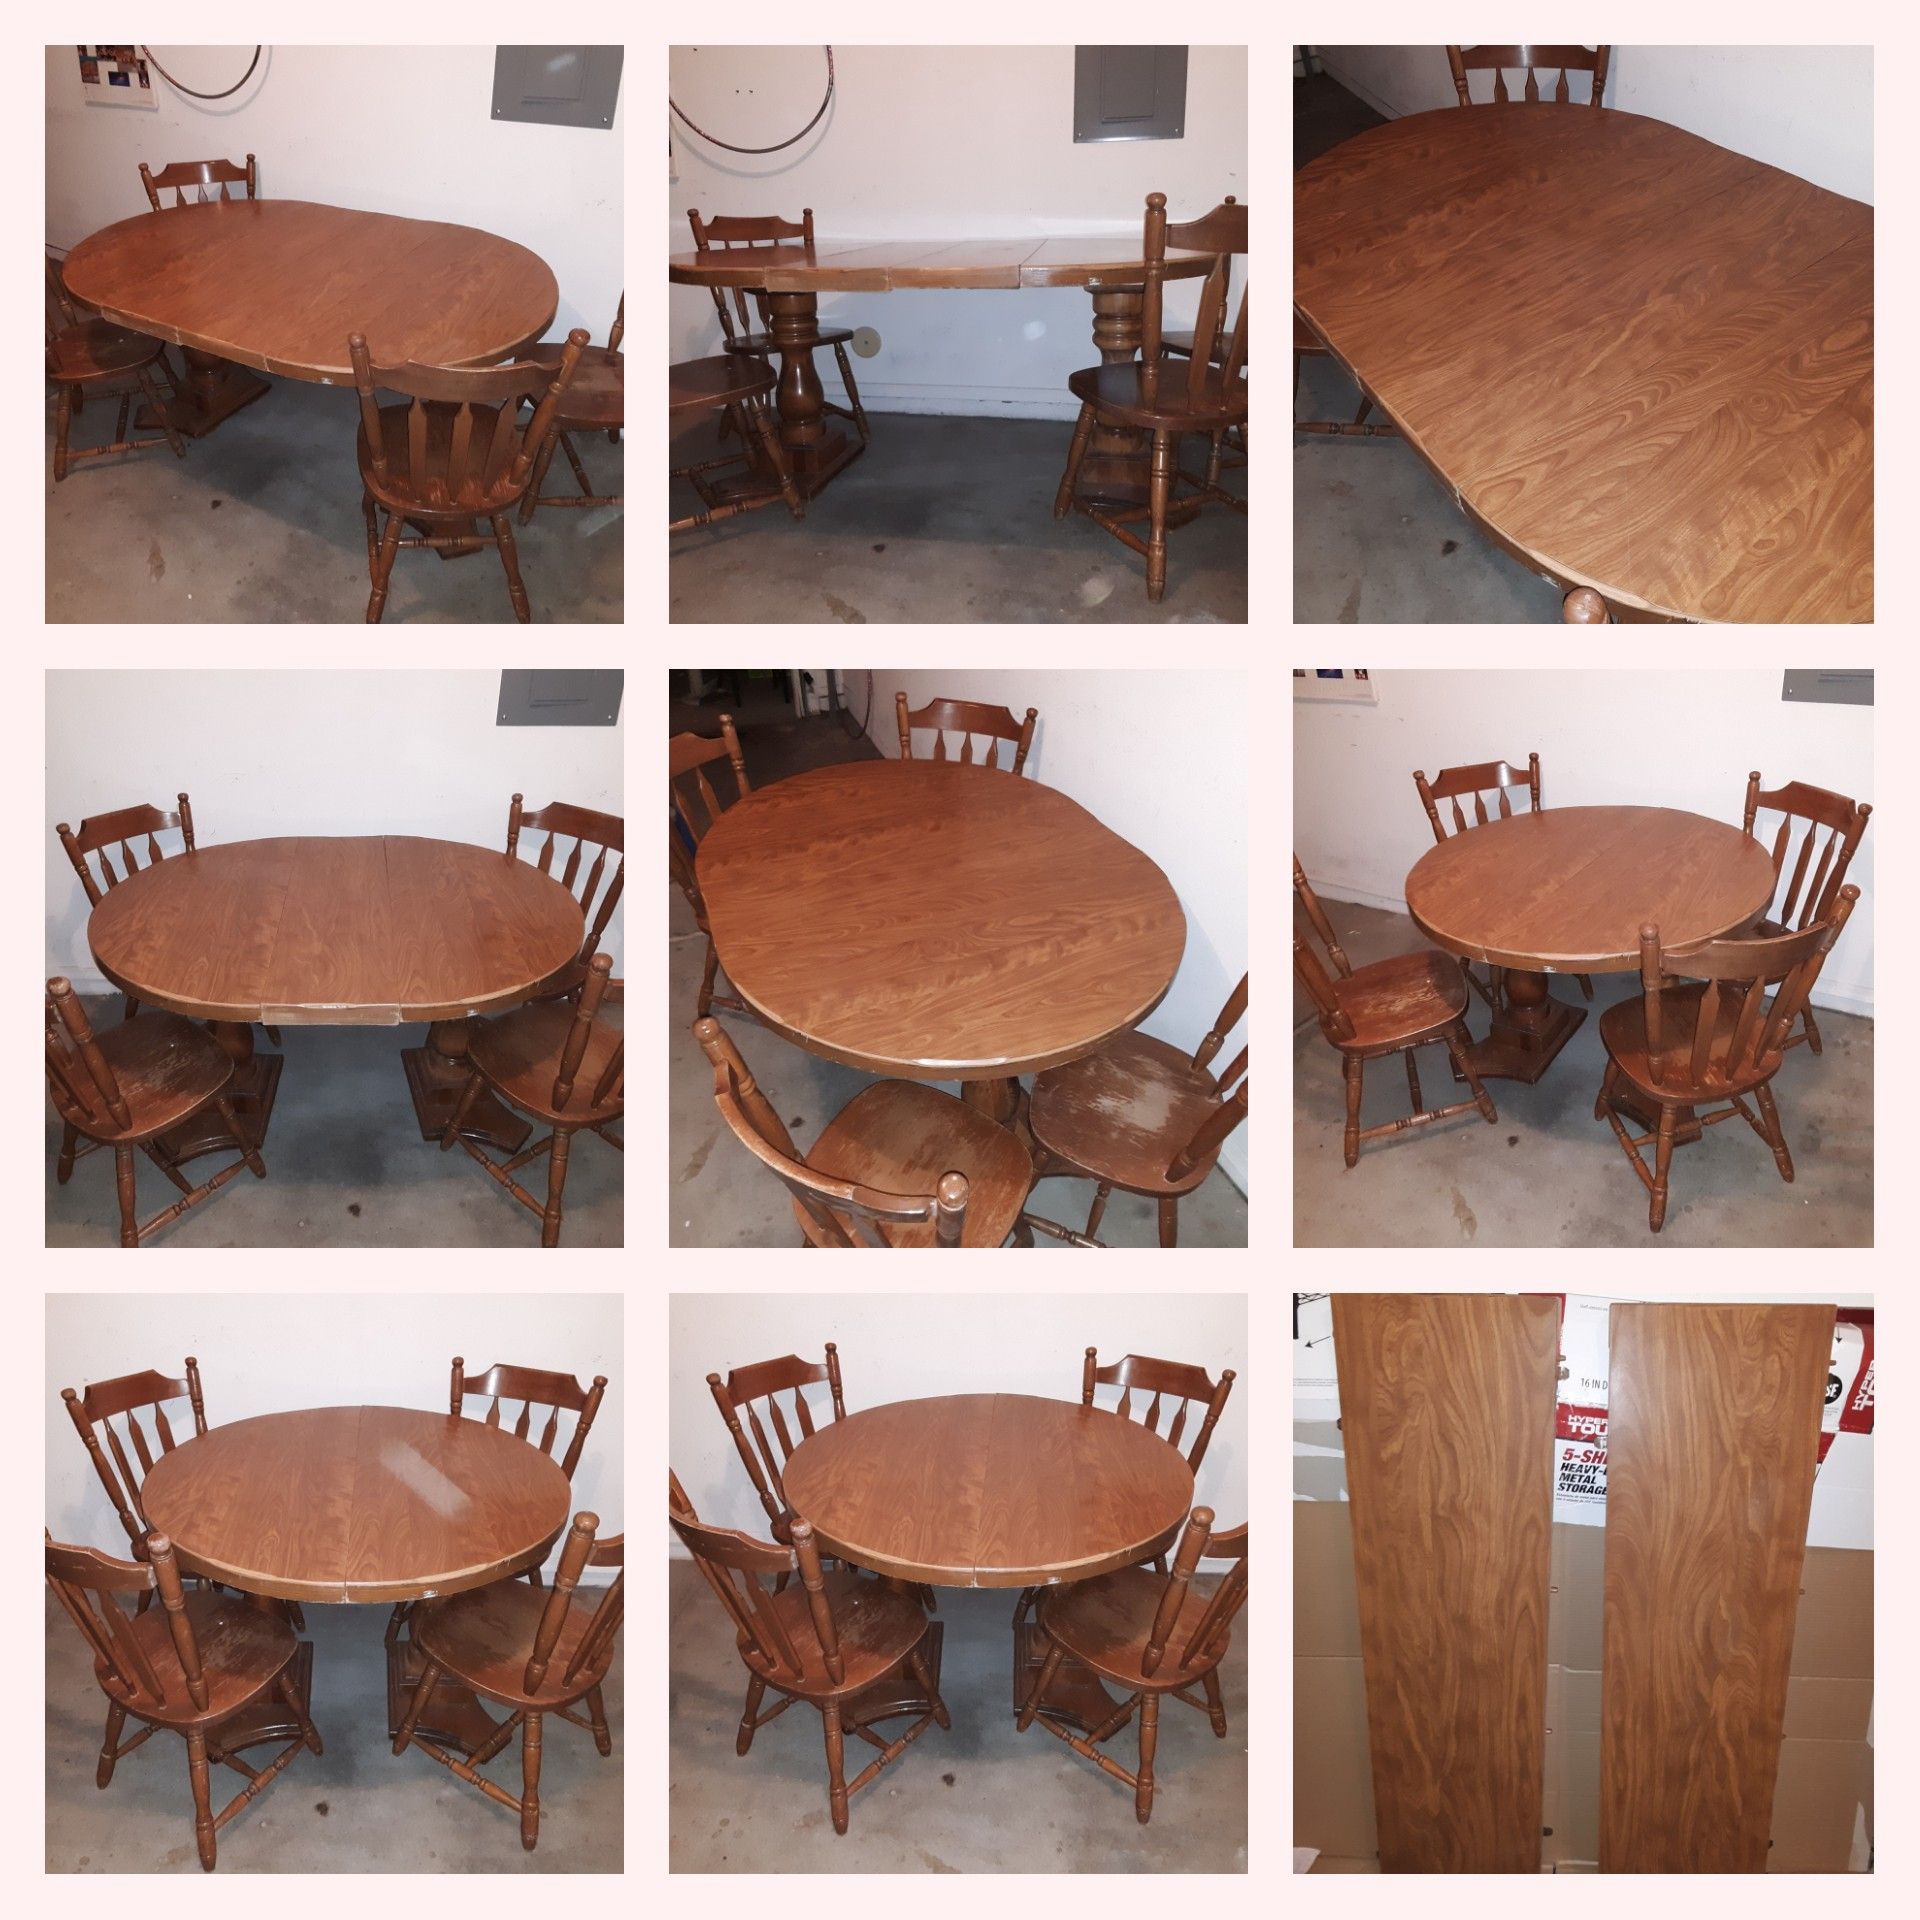 Re-sizable Kitchen Table with 2 inserts & 4 chairs